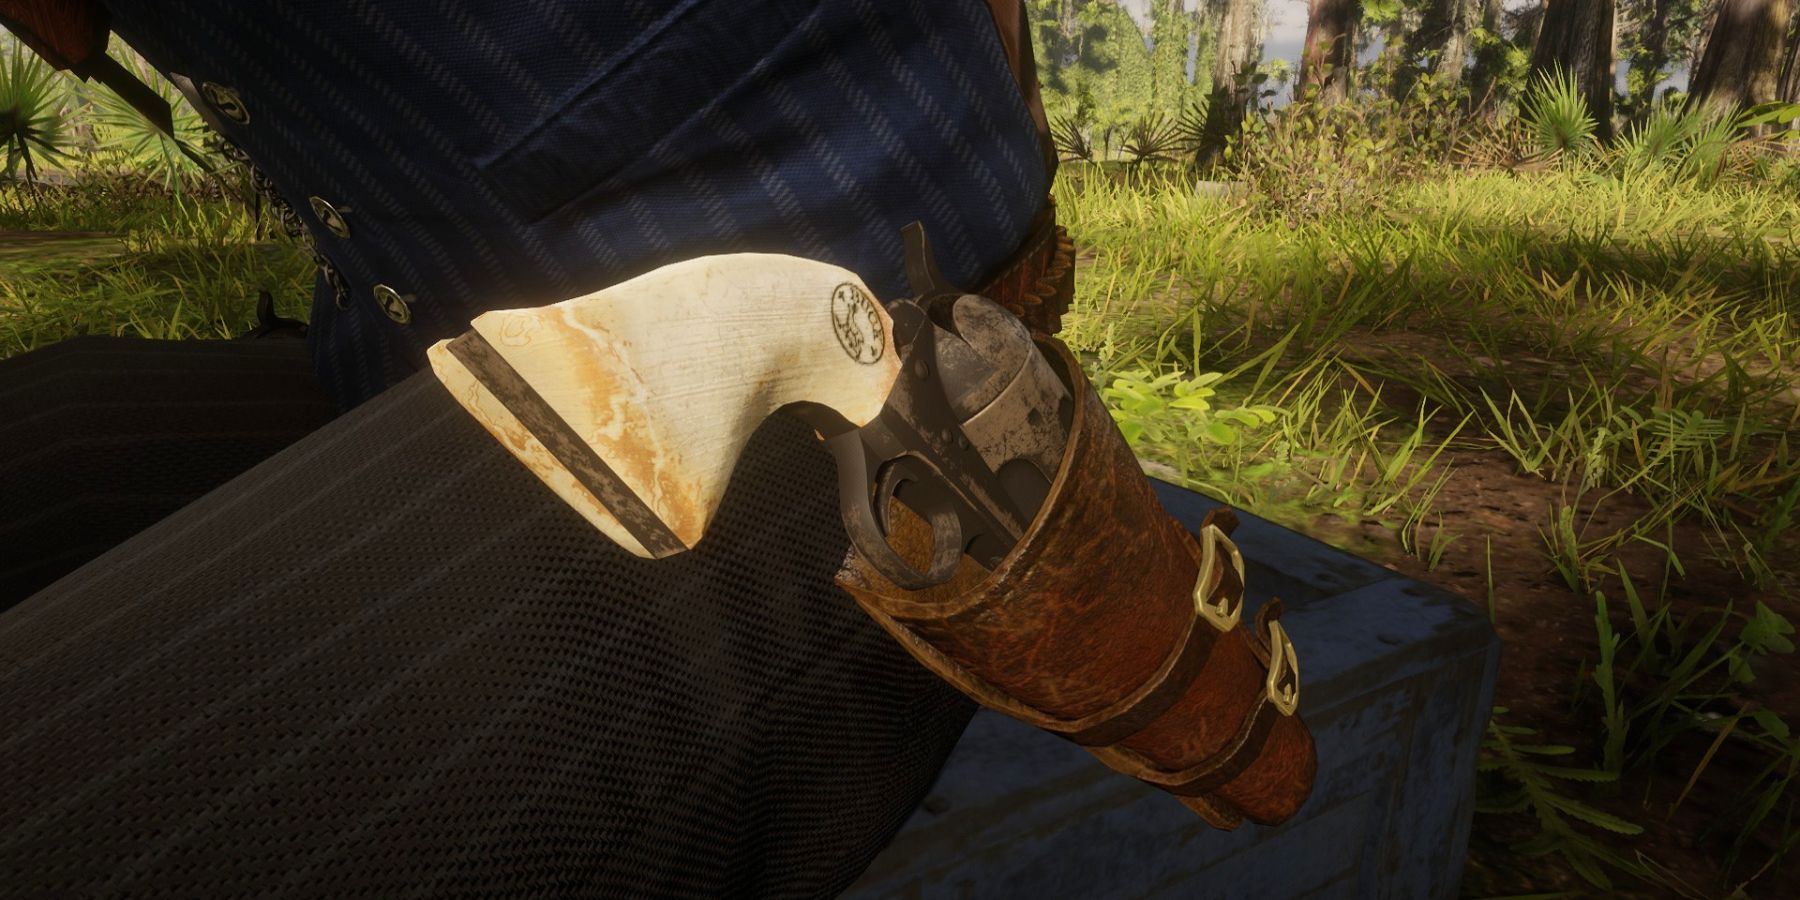 Hosea Matthews carries two matching Cattleman Revolvers in RDR2 that are just re-colors of the weapon